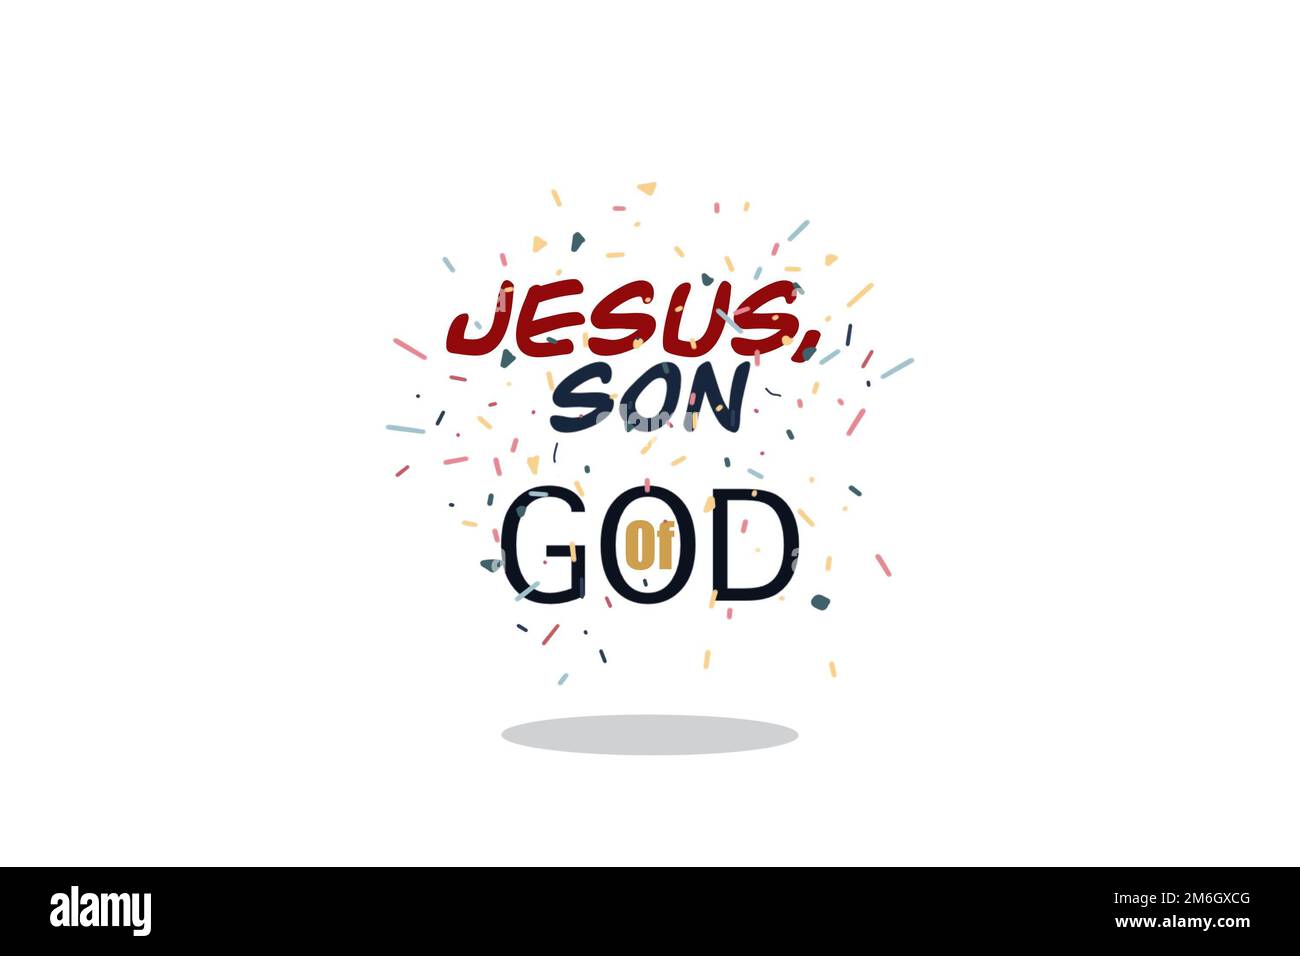 Jesus son of God Calligraphy lettering text banner for sticker, poster, card, postcard. Vector illustration. Stock Photo